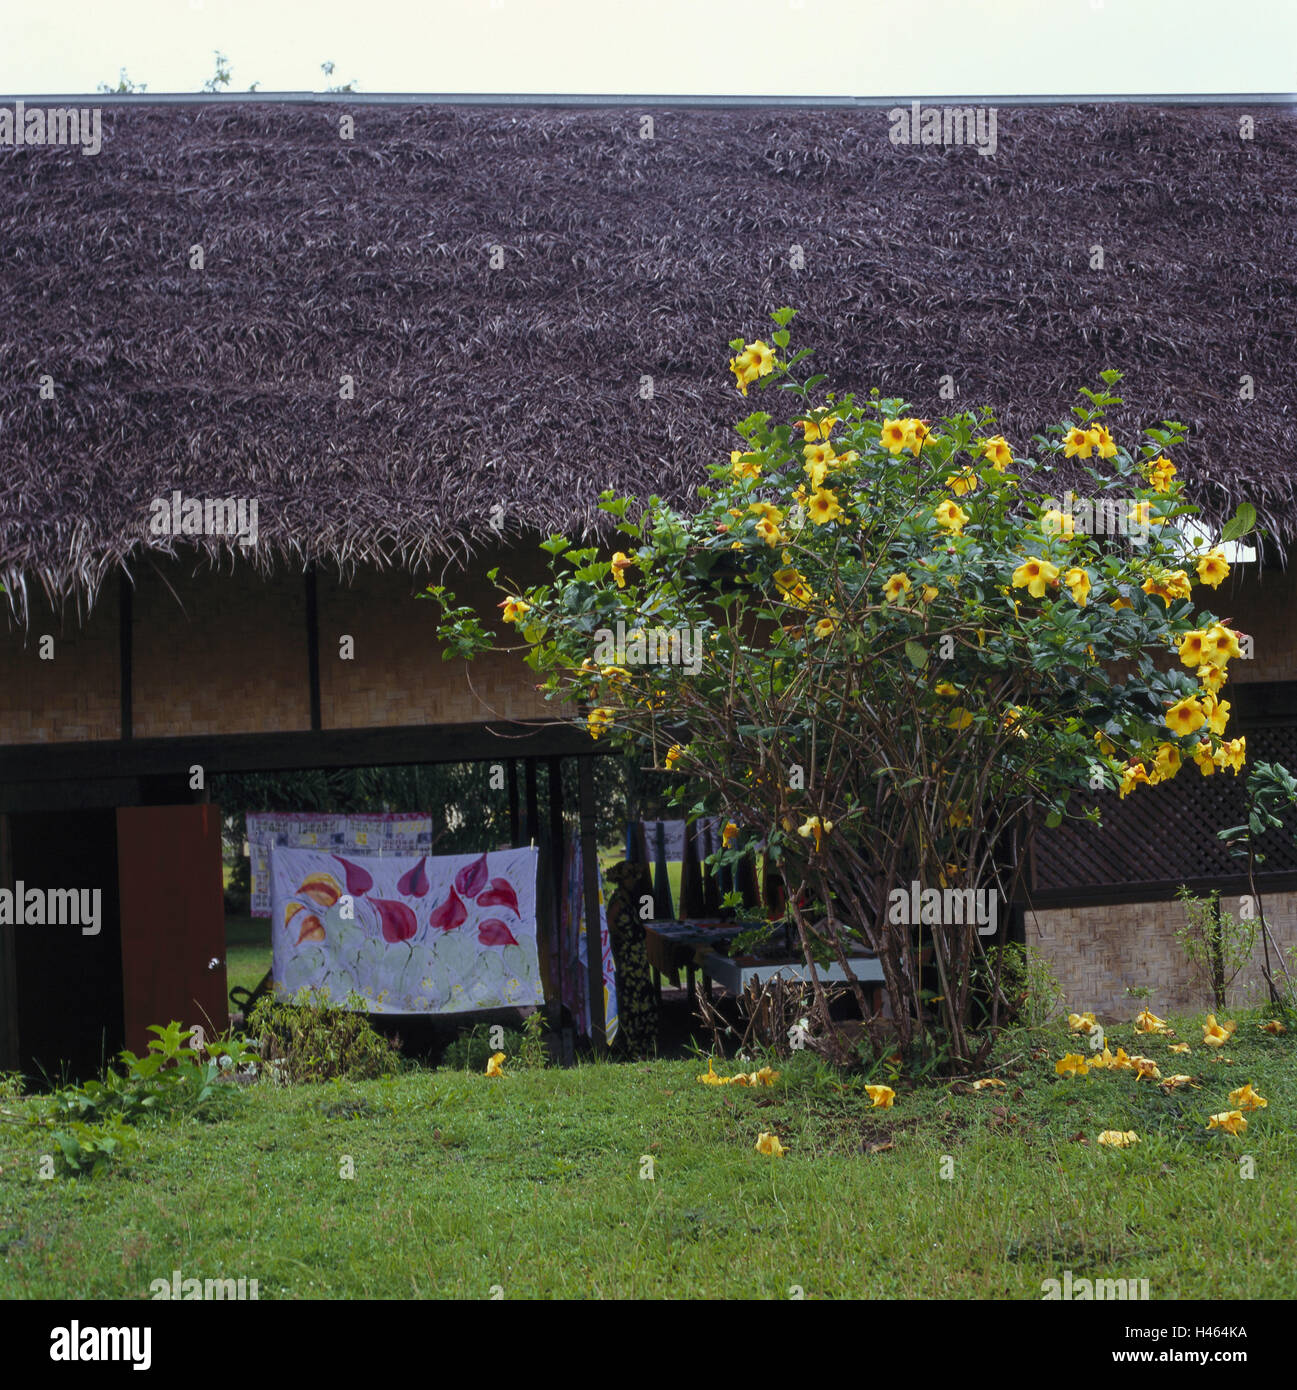 French Polynesia, Hiva Oa, Atuona, residential house, Paul Gauguin, house, building, straw roof, place of interest, destination, tourism, painter, artist, Stock Photo